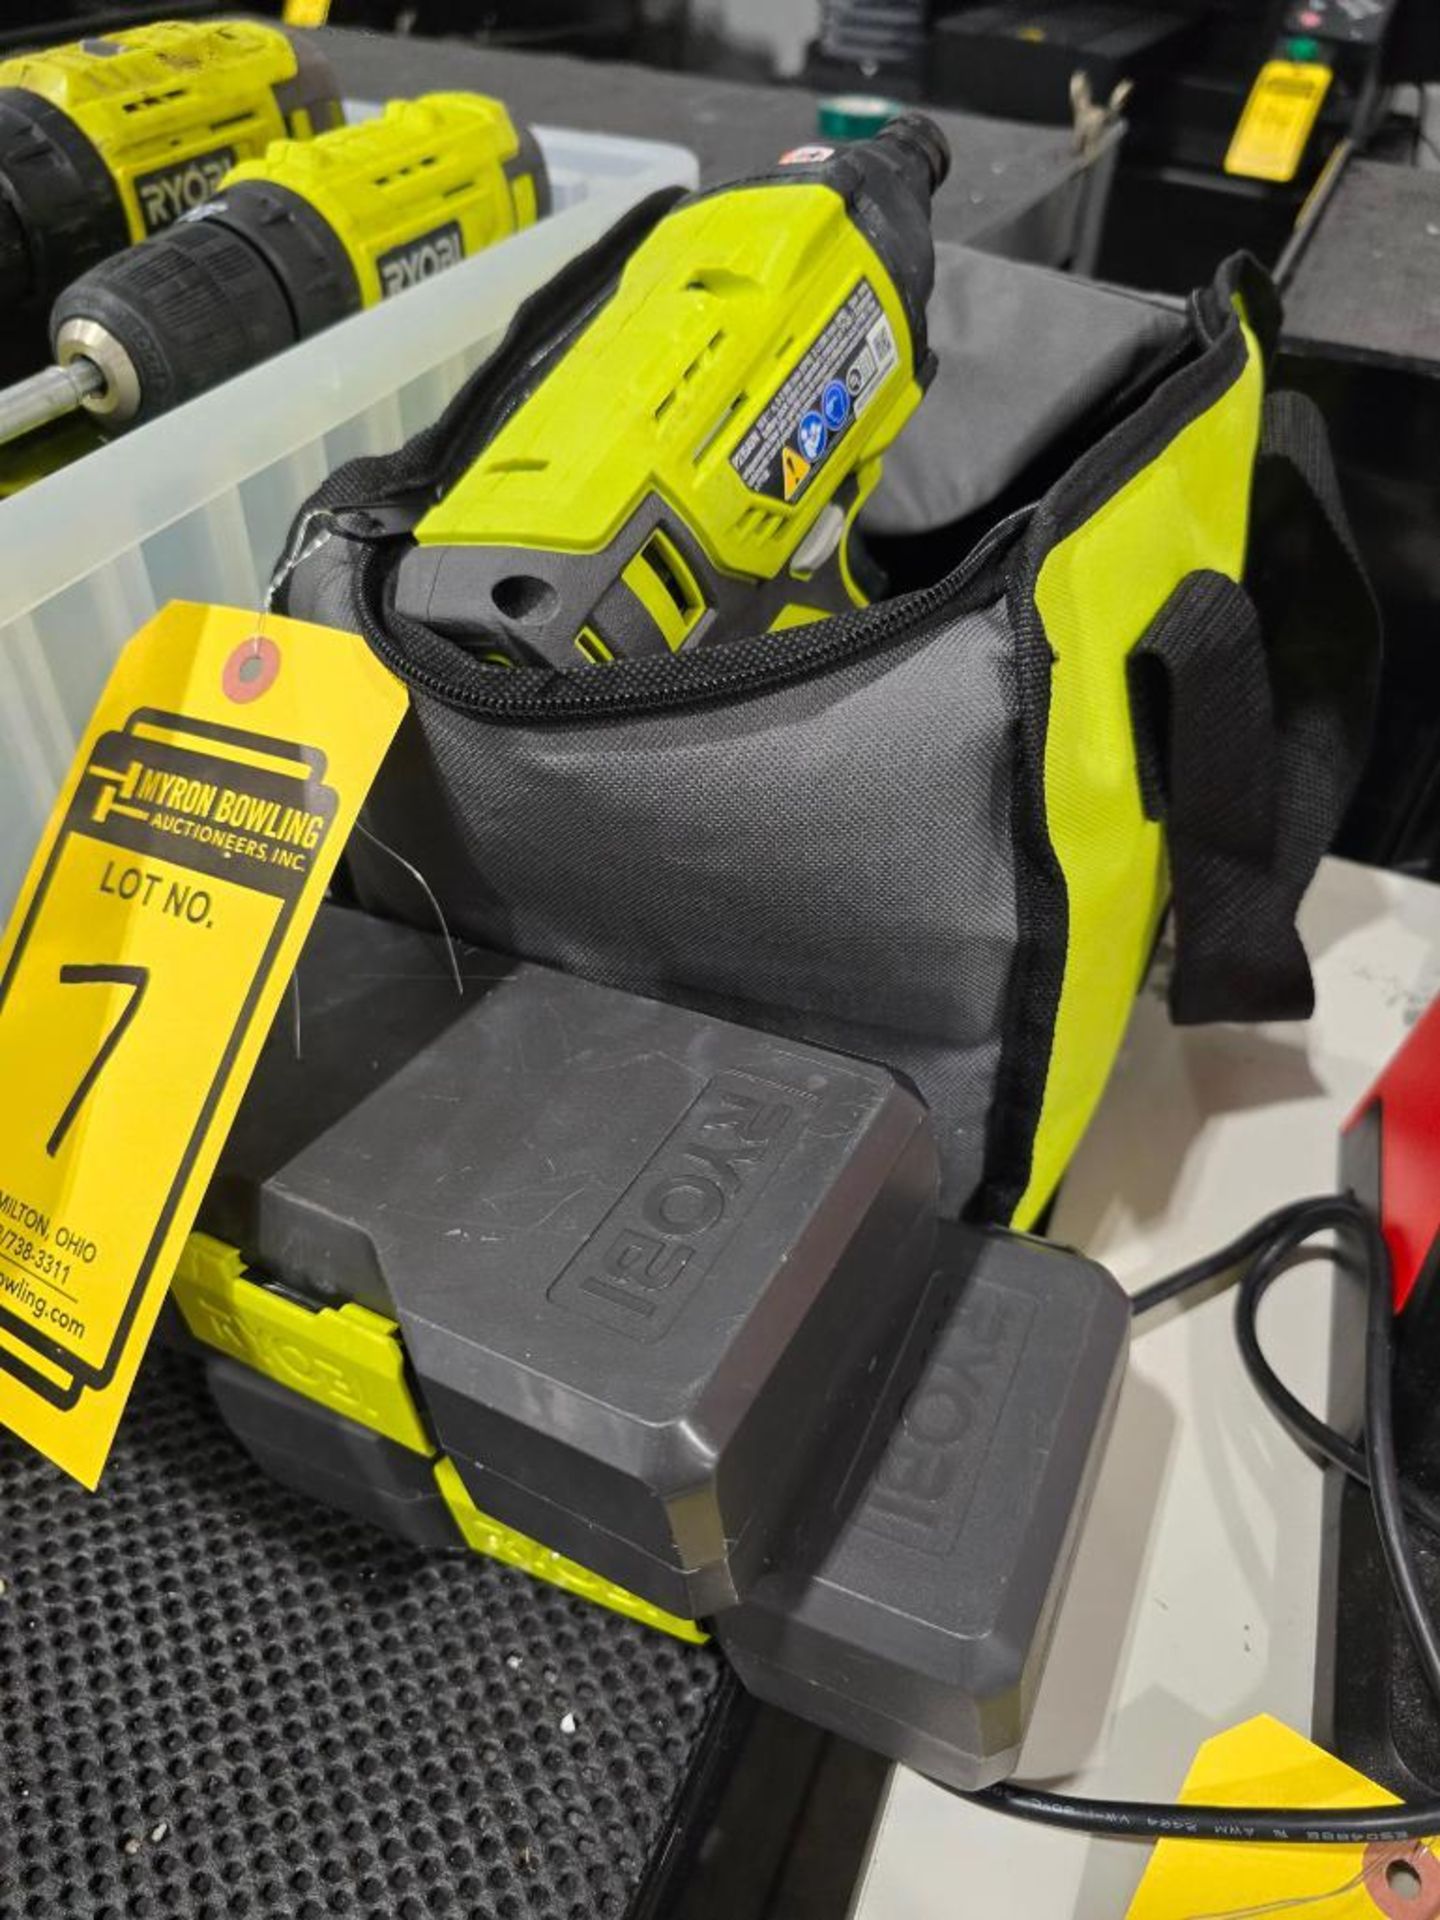 Ryobi 18V Battery Powered Impact Screw Gun w/ Charger & (2) Drill/Nut Driver Sets - Image 3 of 4